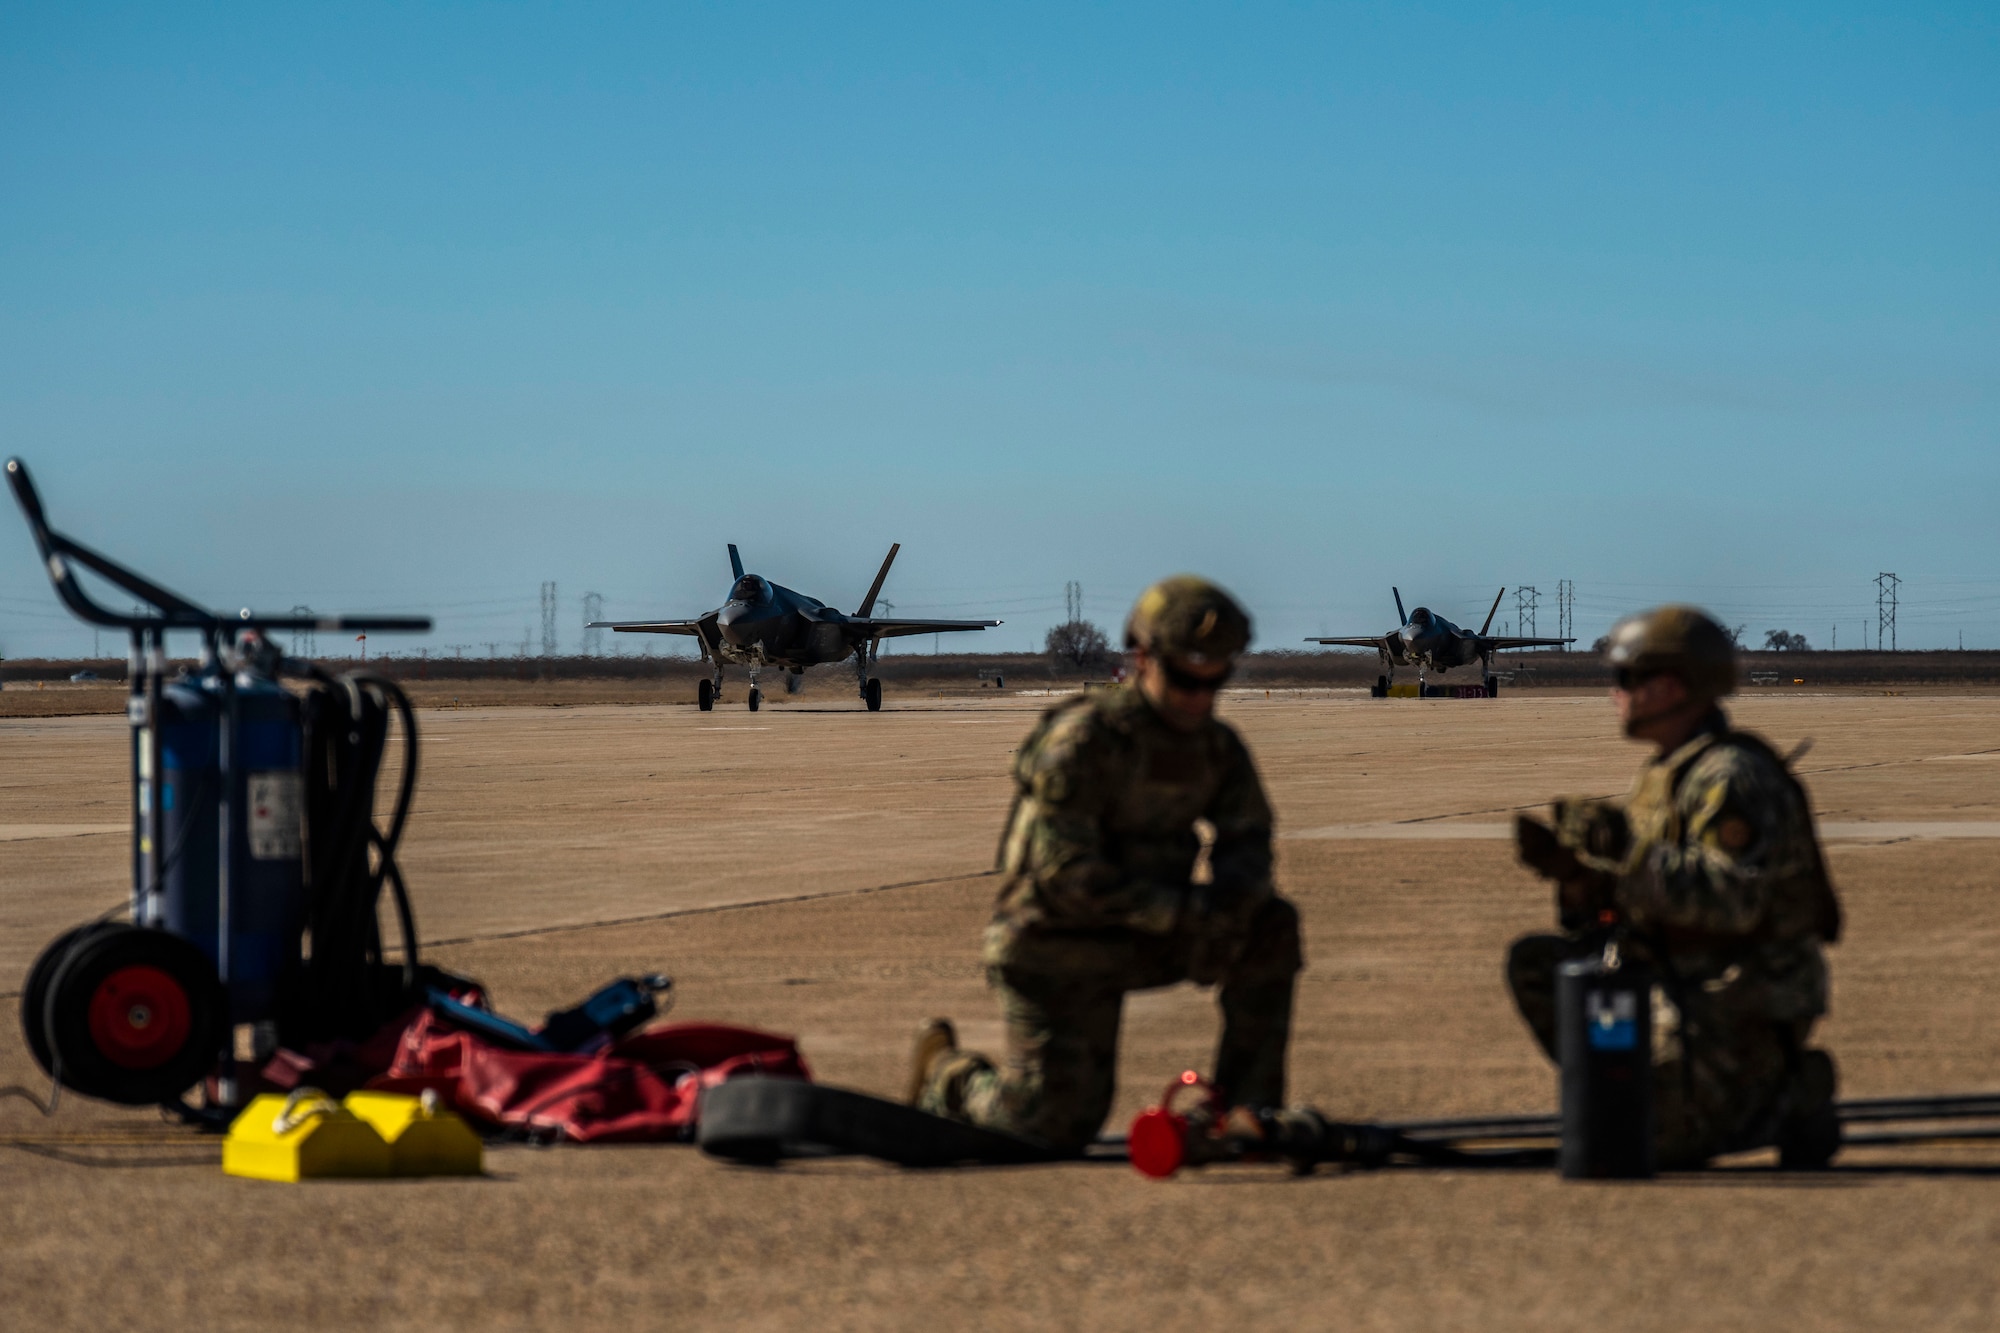 Two Airmen from the 27th Special Operations Logistics Readiness Squadron prepare for incoming F-35A aircraft during training for a Forward Area Refueling Point operation at Cannon Air Force Base, N.M., Feb. 26, 2019. This was the first time FARP training was conducted with the F-35A from a C-130. (U.S. Air Force photo by Staff Sgt. Luke Kitterman)